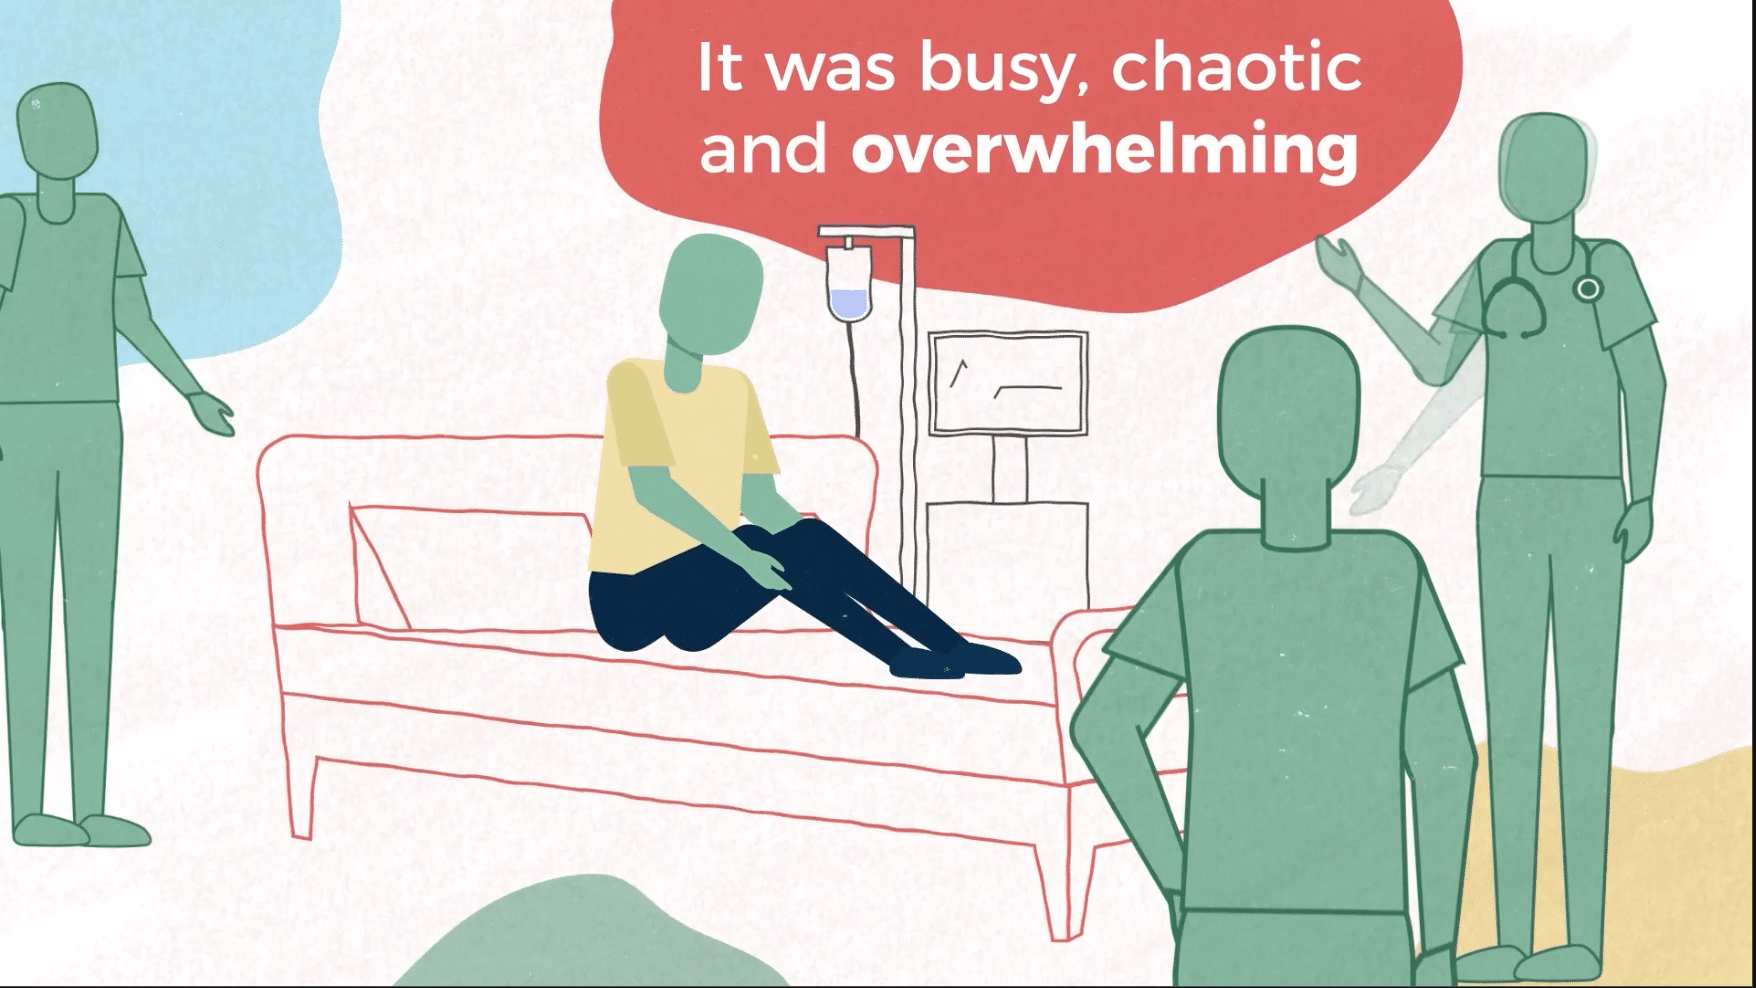 Featureless young person sits on hospital bed, while doctors look on. A voice bubble reads 'It was busy, chaotic and overwhelming'.